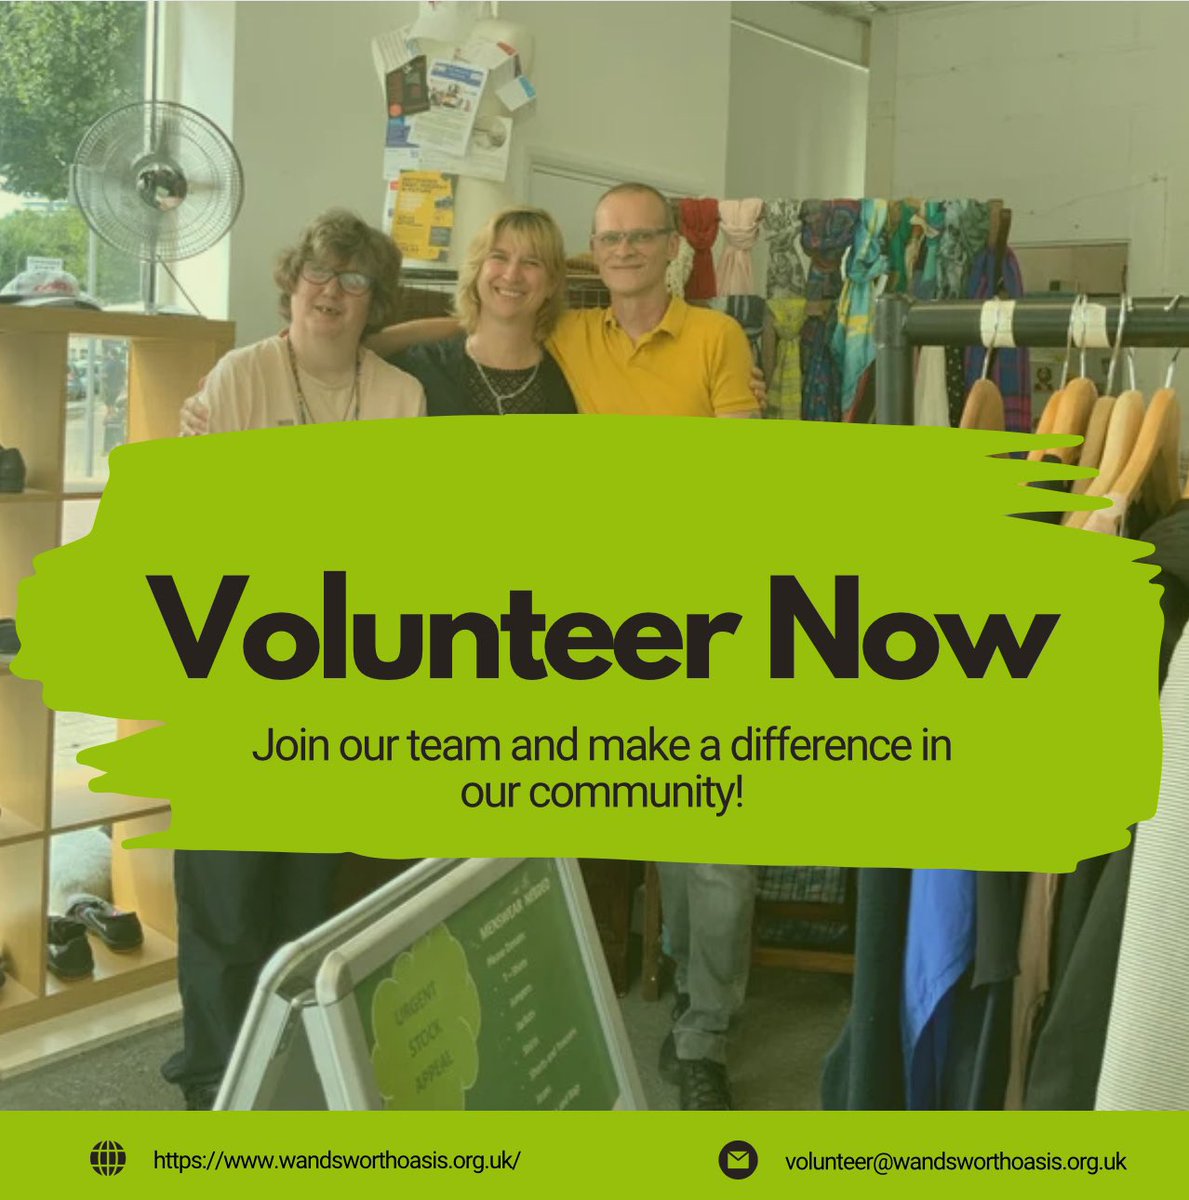 Want to be a part of our incredible team? Apply to volunteer with us today! It's quick and easy, and we have opportunities in all of our shops and at fundraising events. 💪

 #VolunteerWithUs #CharityShops #GivingBack #WandsworthOasis #LambethLove #VolunteerOpportunity